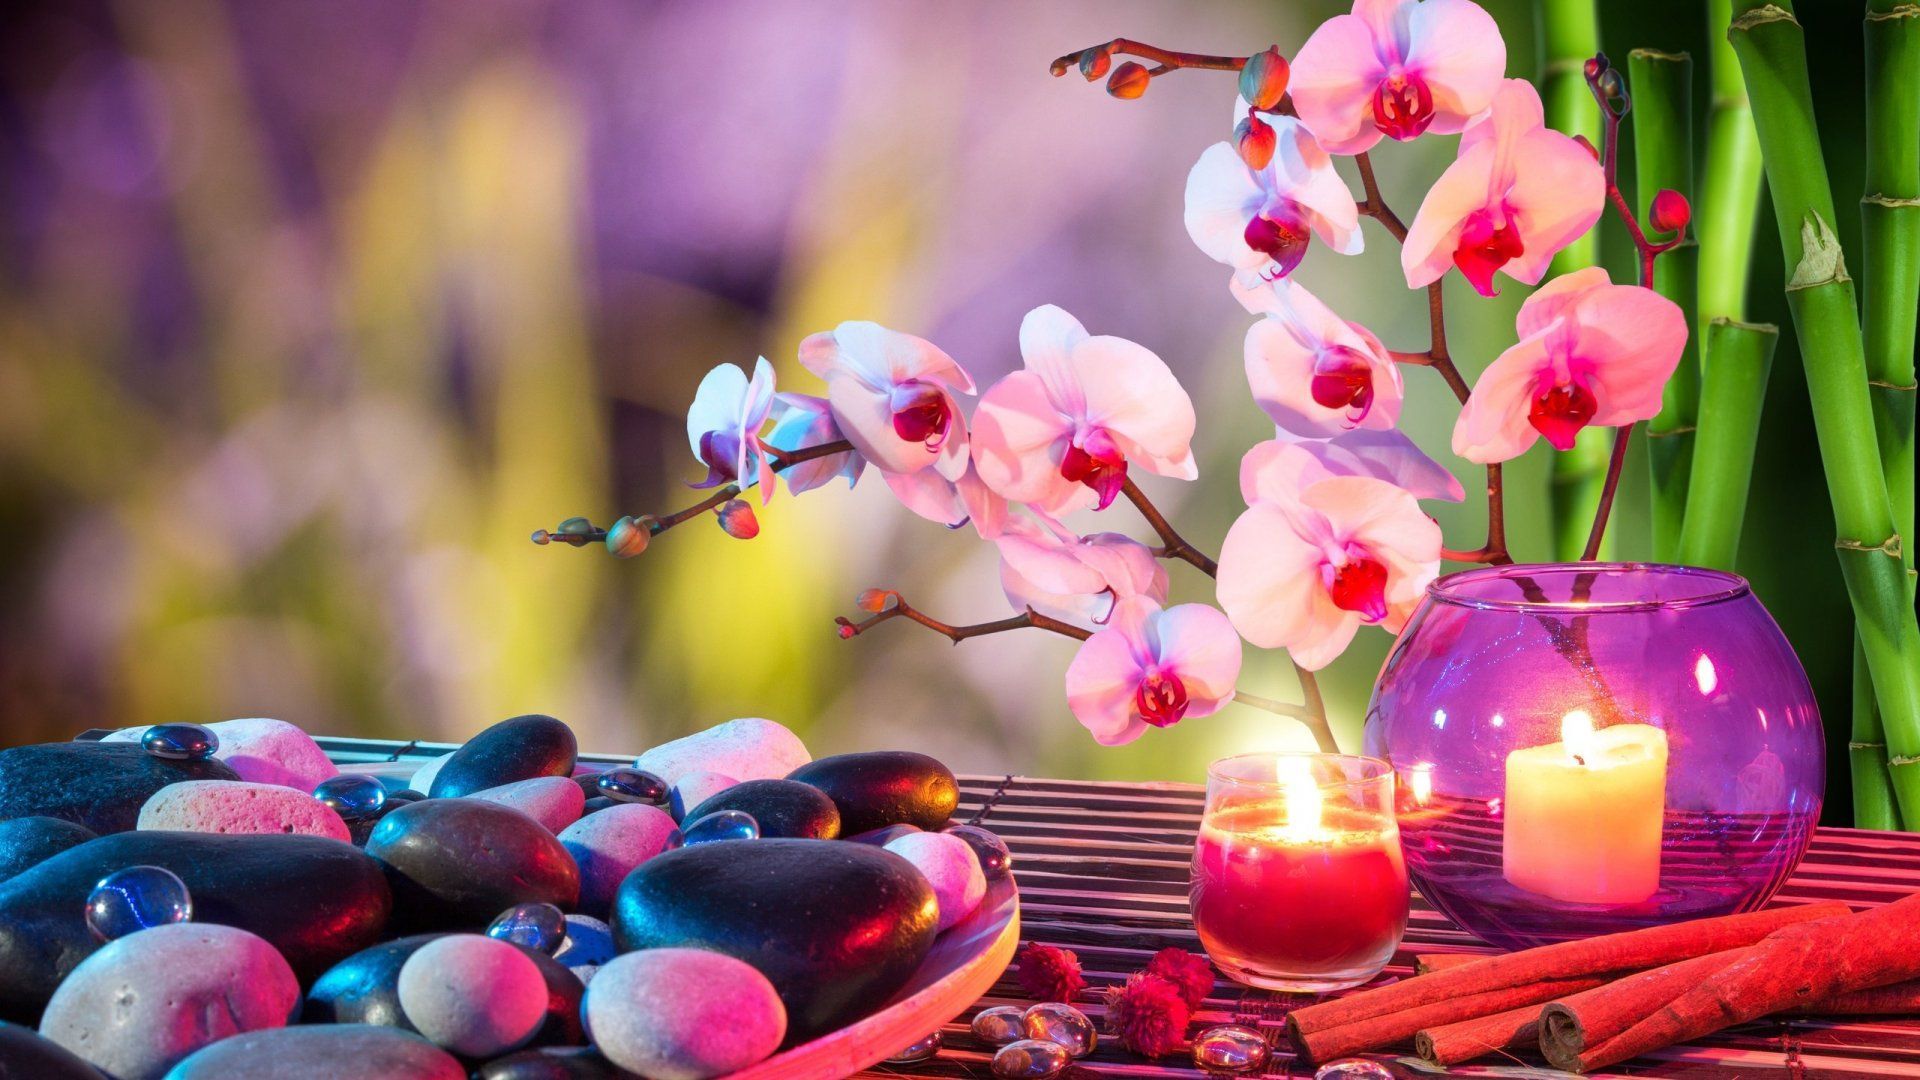 Orchids Candles Stones Wallpaper Live Wallpaper HD. Candles, Feng shui, Orchids